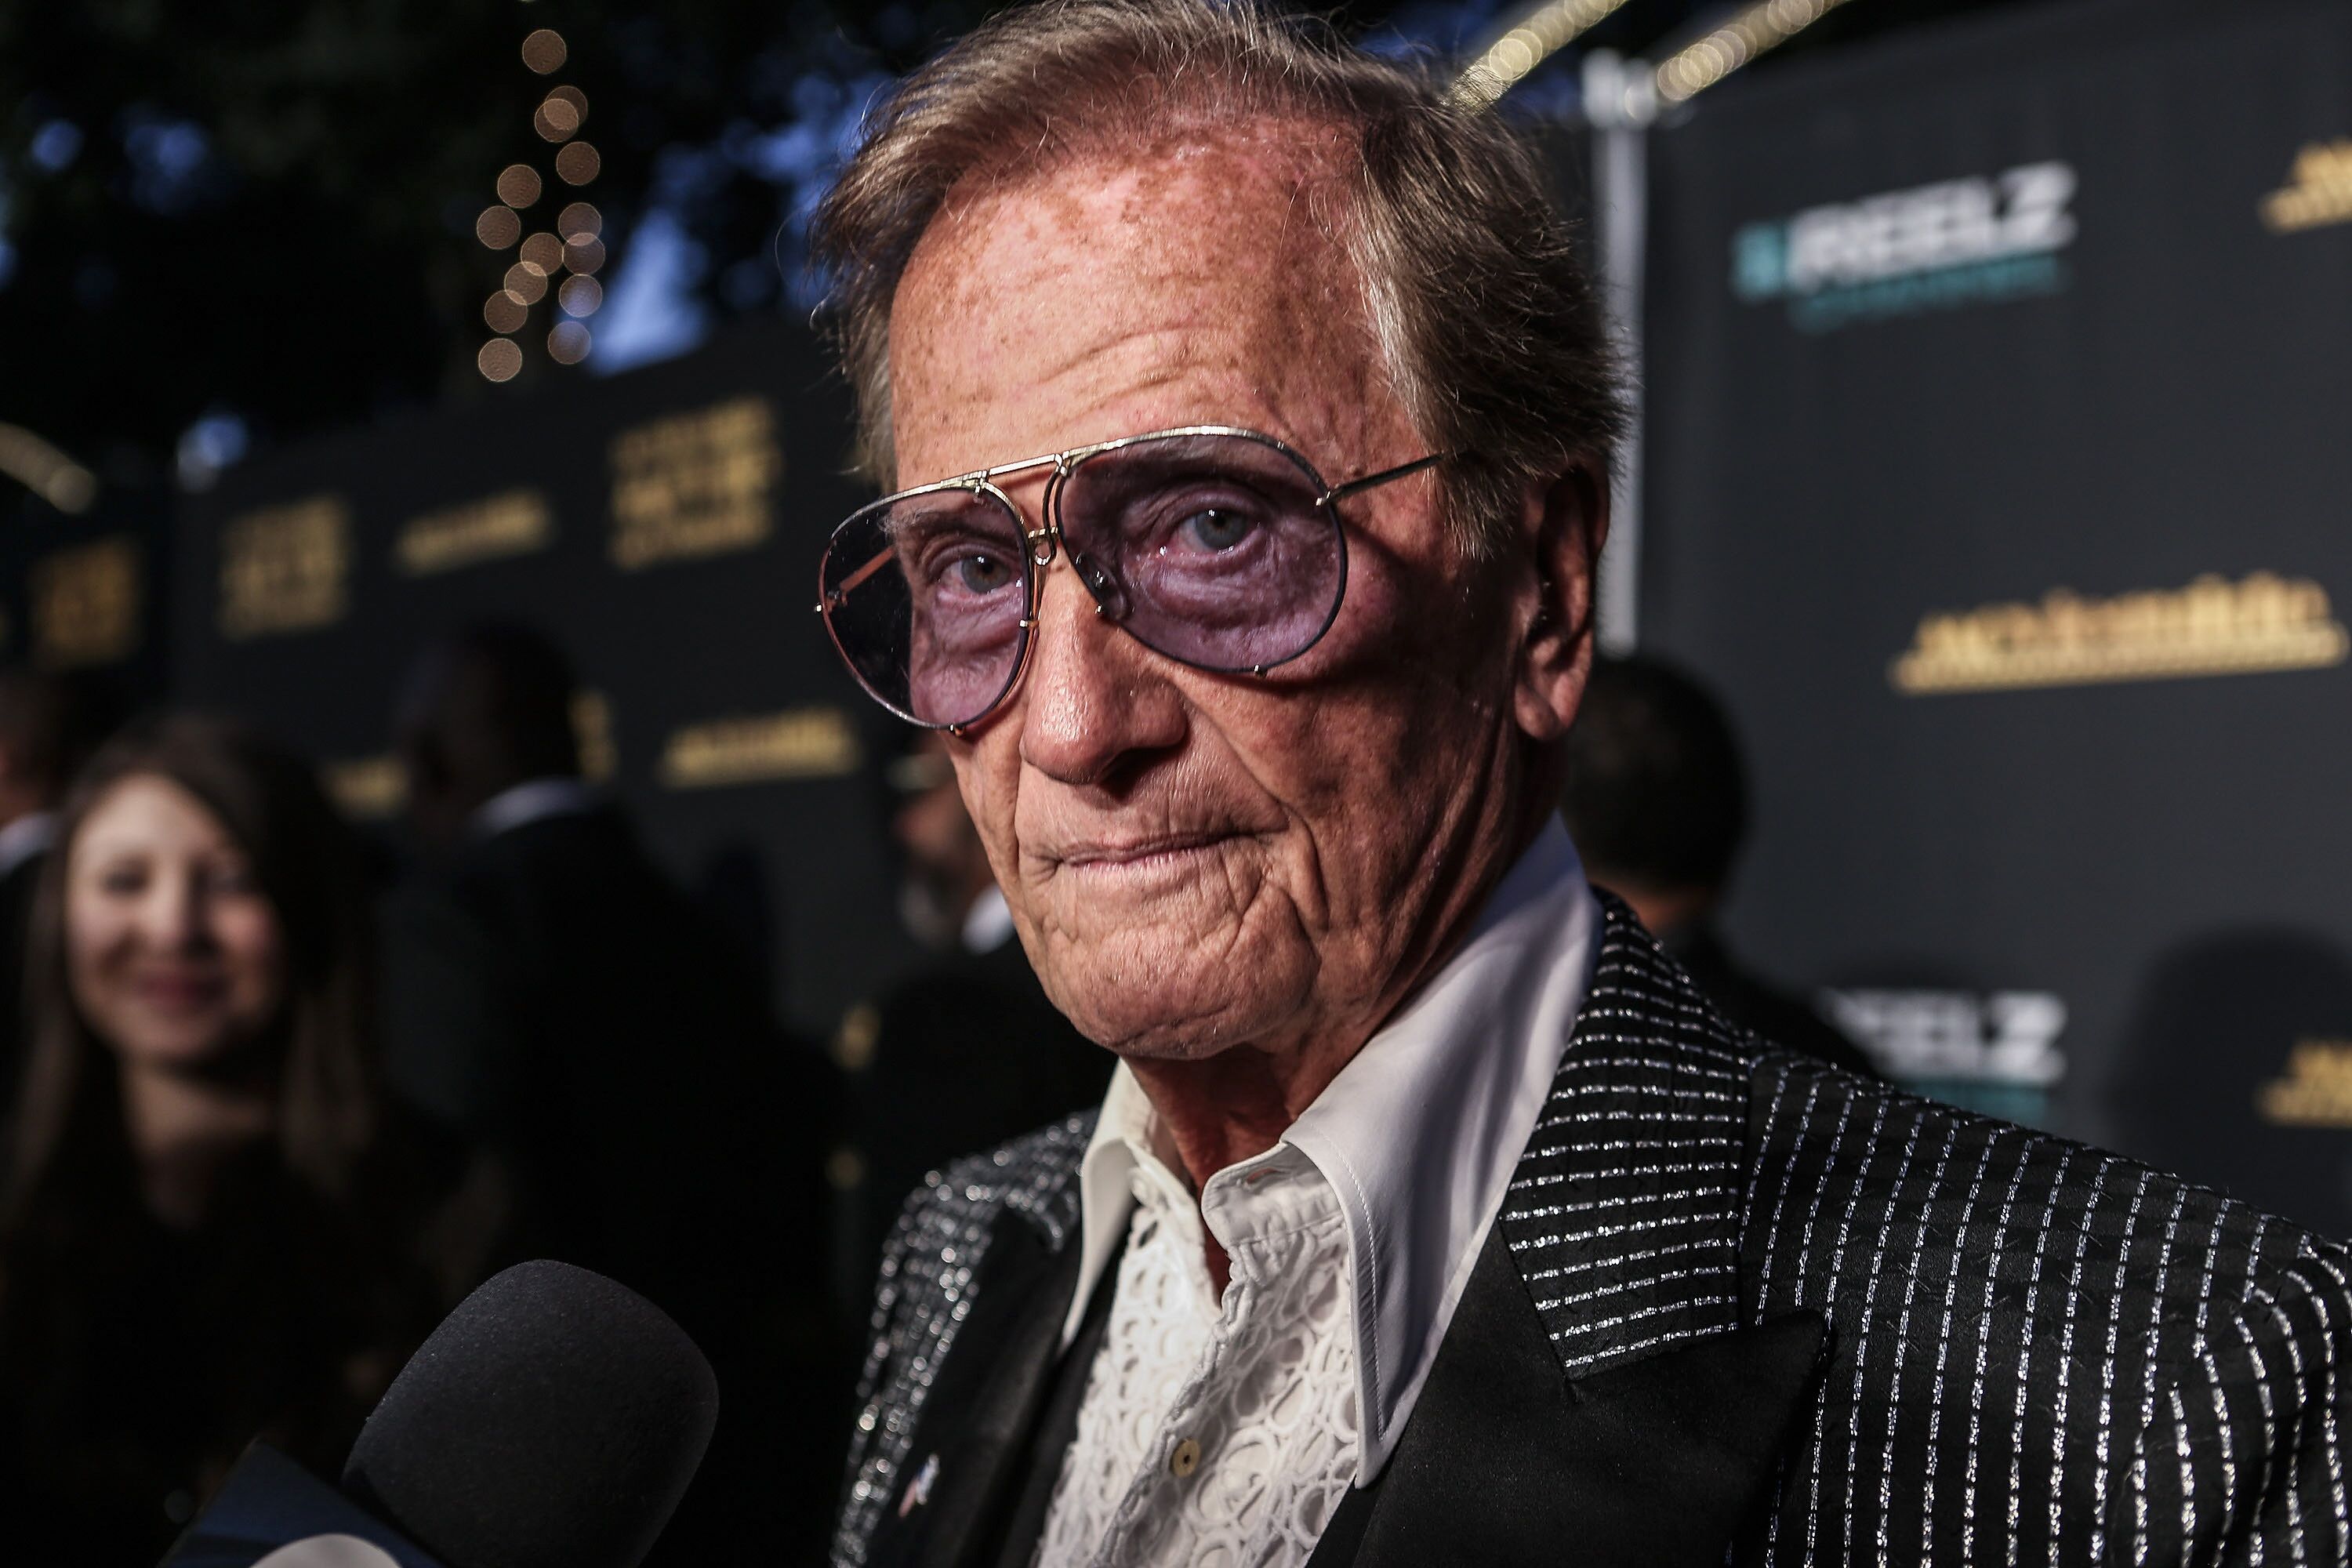 Pat Boone at the 23rd Annual MovieGuide Awards in Universal City, California in 2015 | Source: Getty Images